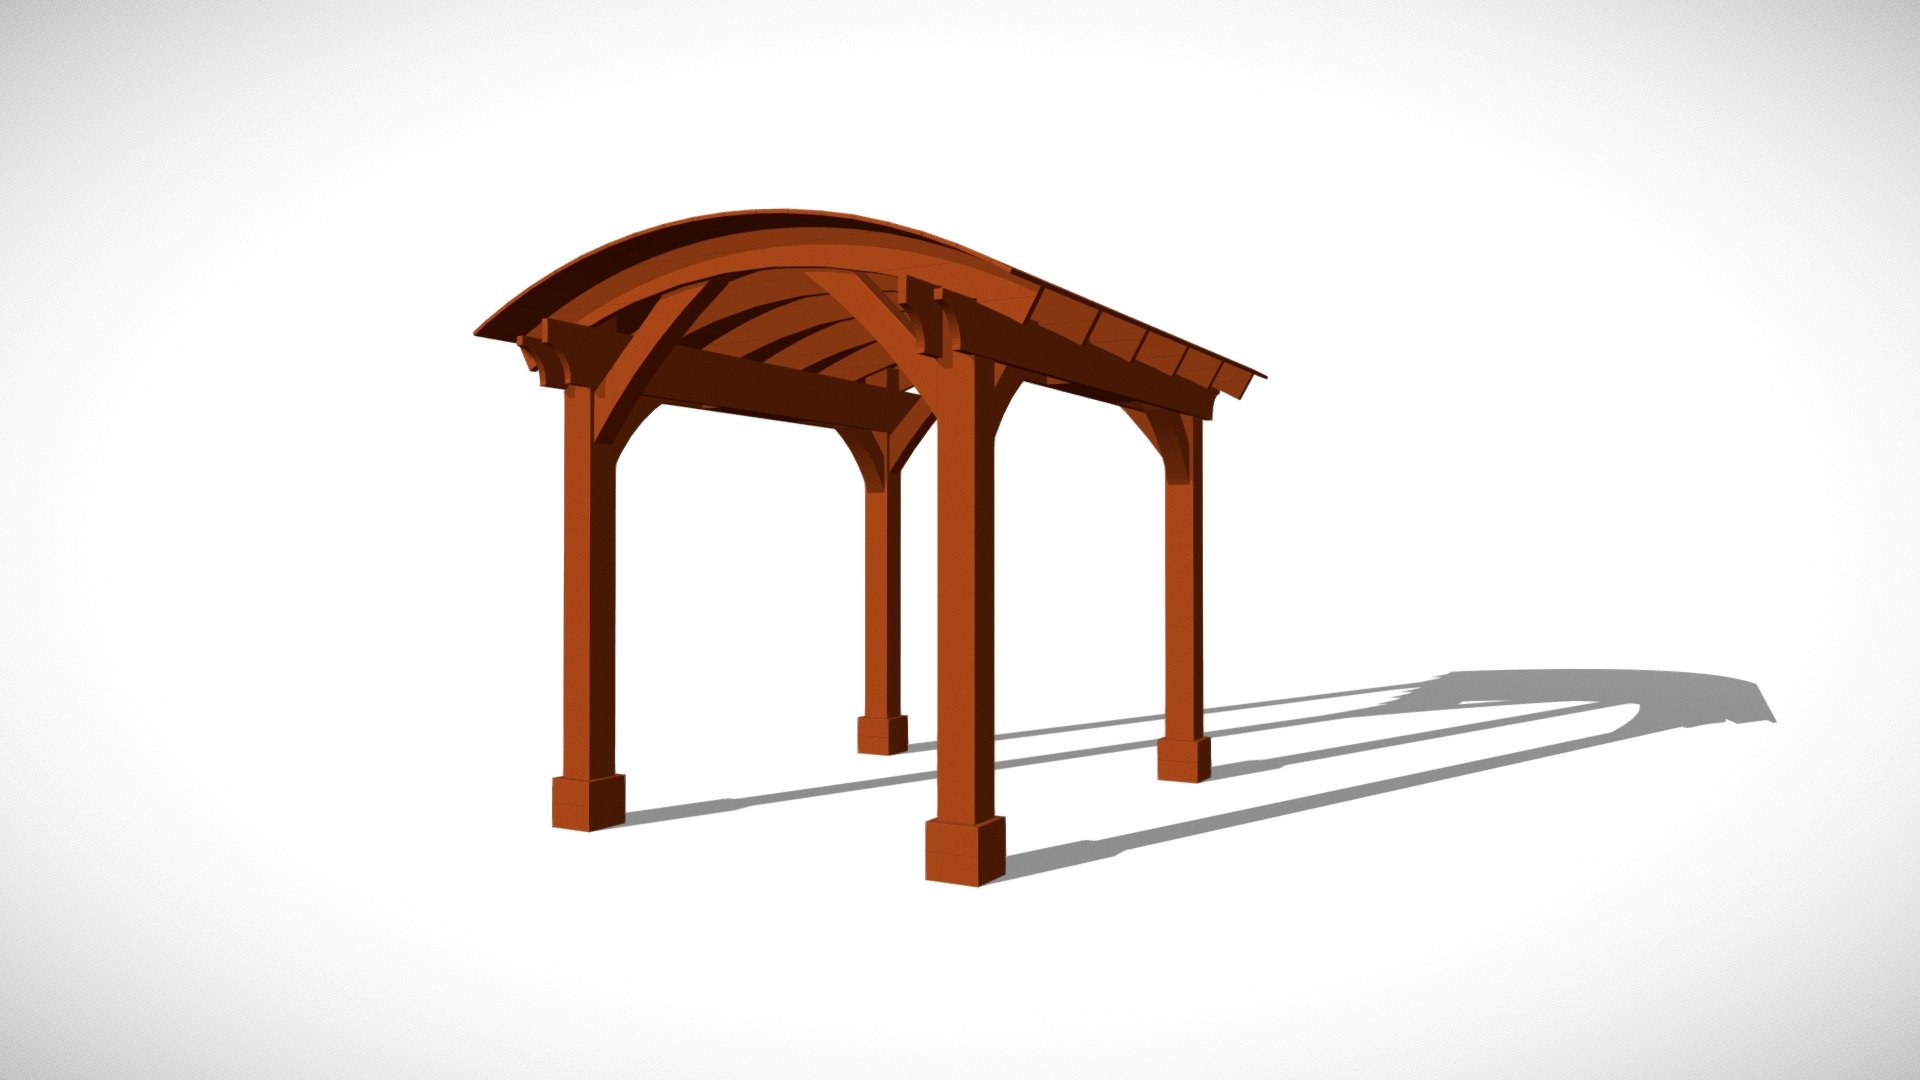 Arched Thick Timber Pavilion - 12' L x 10' W
8x8 Posts

Drawn by Ivanna Garcia
6/27/2022 - Arched Thick Timber Pavilion - 12' L x 10' W - 3D model by Forever Redwood Engineering Team 3d model